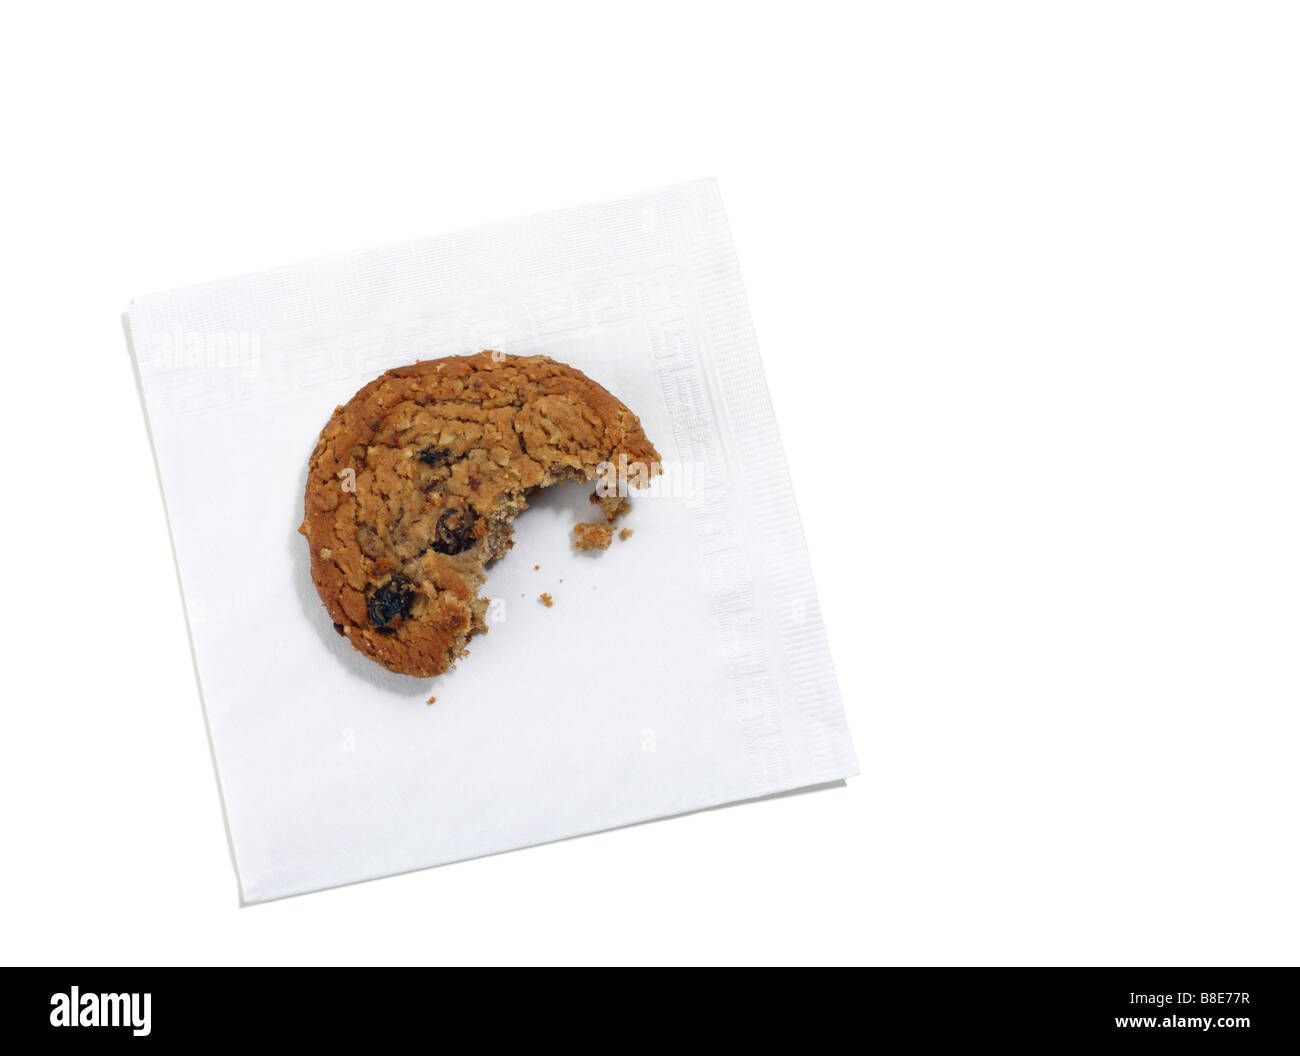 Raisin Oatmeal Cookie With Bite taken out Stock Photo